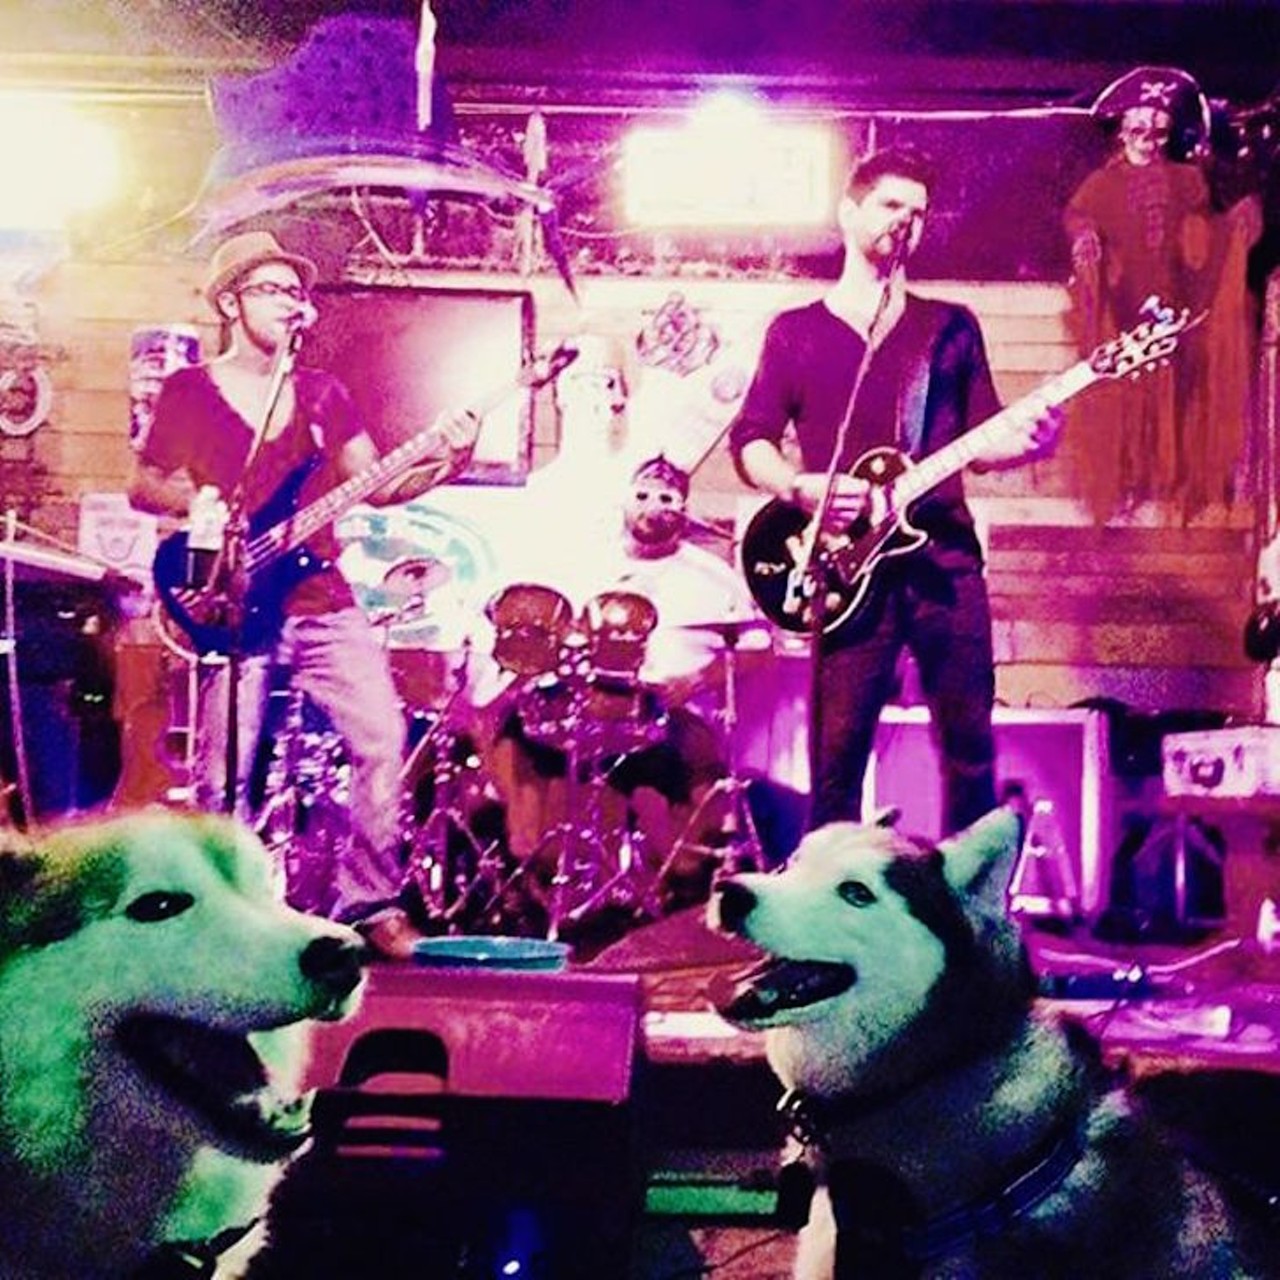 Belle Isle Yacht Pub 
7521 S. Orange Ave., 407-850-3491 
You and your pal can visit Belle Isle Yacht Pub for a relaxing evening out, but if you&#146;re wanting some music to jam to, this neighborhood pub features live music Tuesday through Saturday. 
Photo via belle_isle_yacht_pub/Instagram